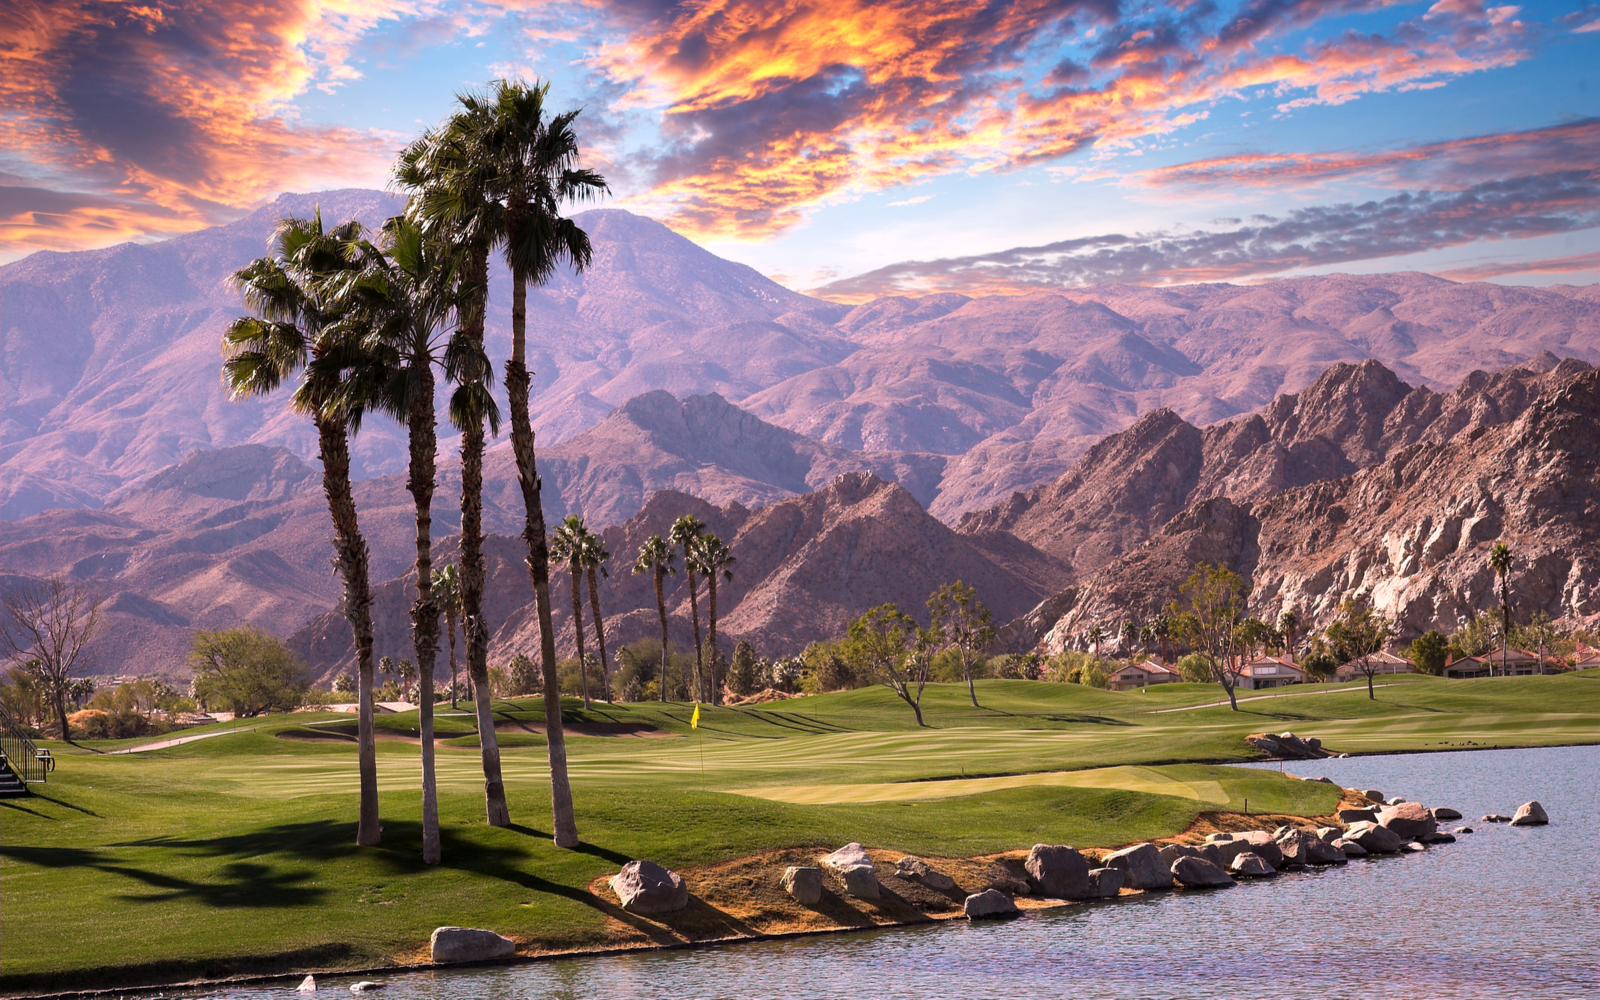 Photo of a golf course at dusk for a piece on the best things to do in Palm Springs California